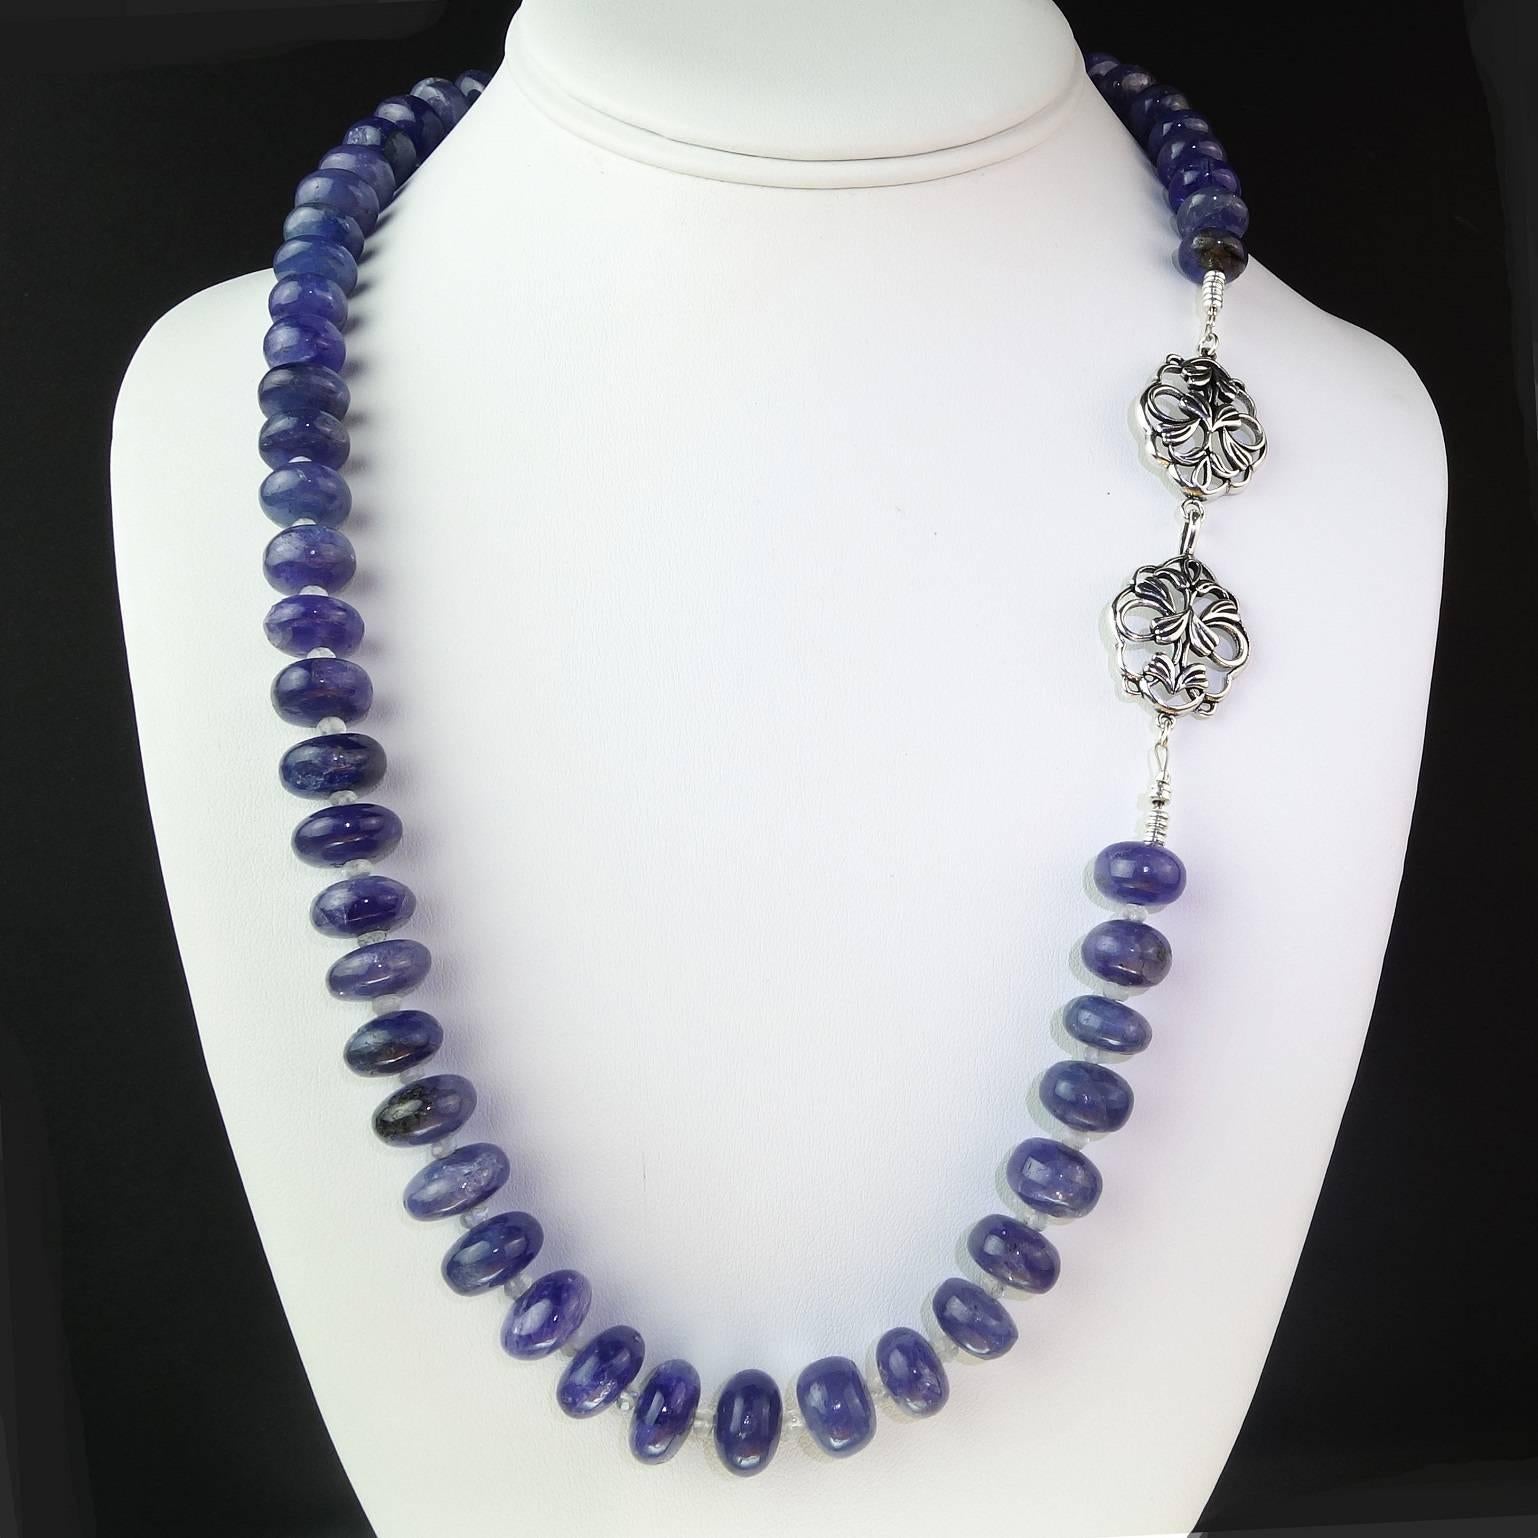 23.5 Inch Necklace Cabochon Rondel Tanzanite accented with faceted Moonstones.  These are highly polished and translucent gemstones in a lovely shade of bluish purple. The Tanzanite measures approximately 11MM in size.  The clasp is a double floral